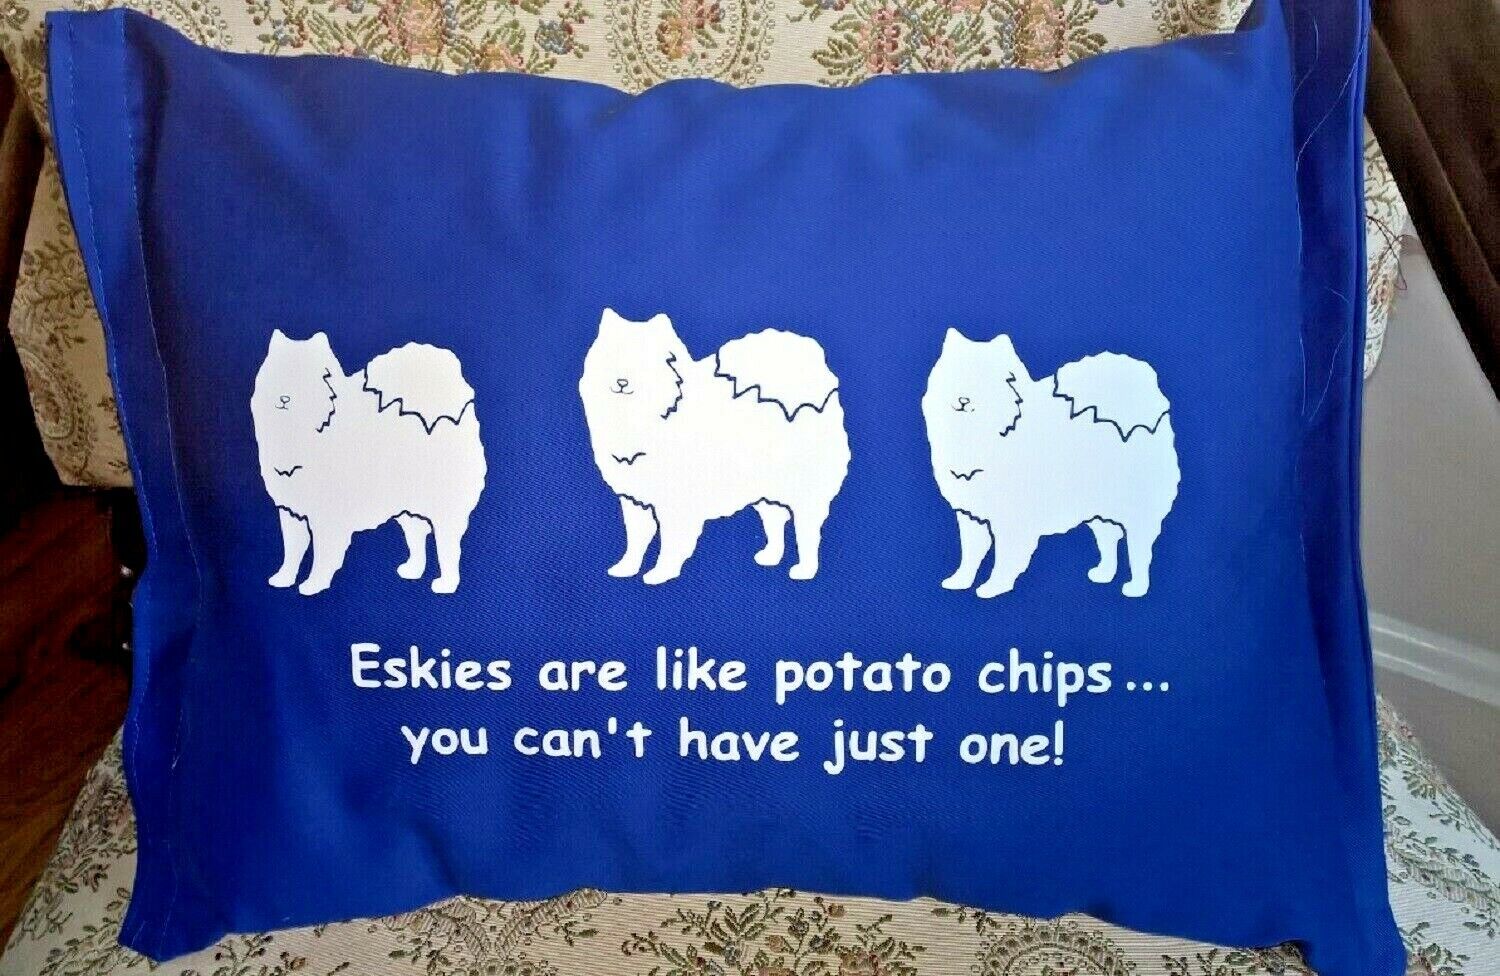 Eskies Are Like Potato Chips! Pillow Sale Royal With White American Eskimo Dogs